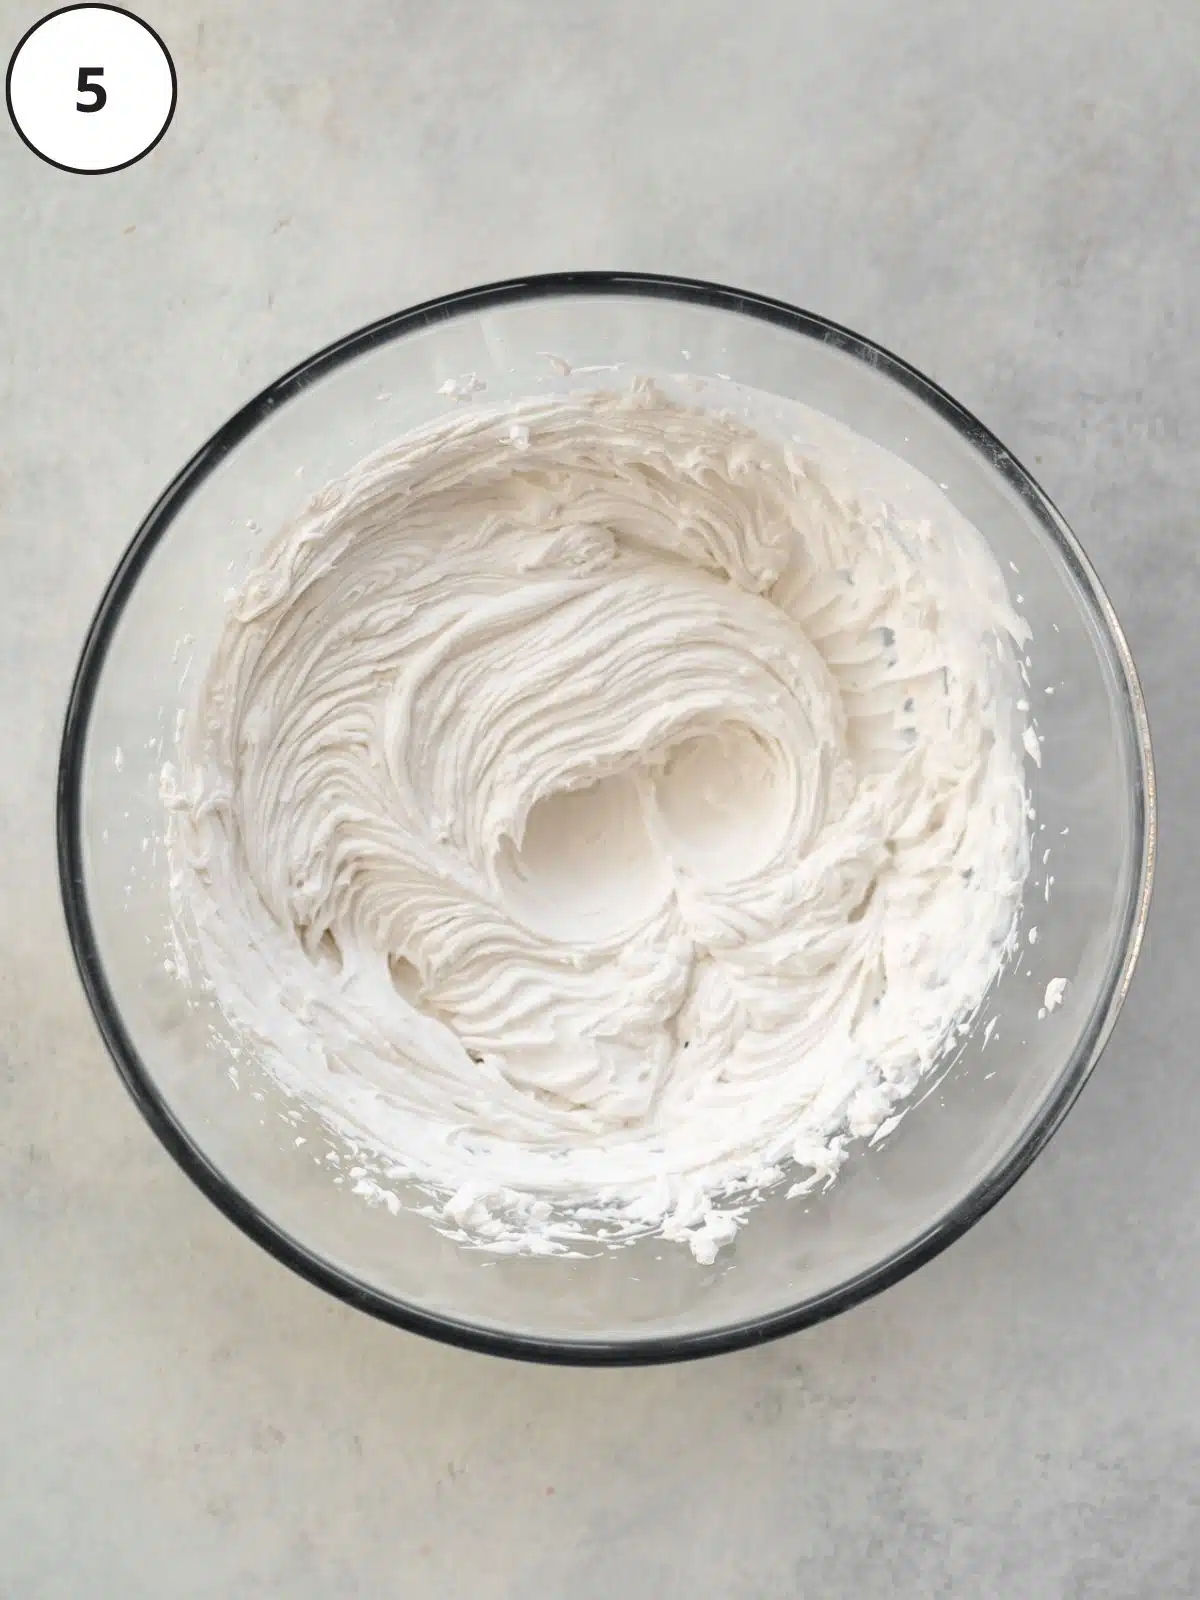 vegan coconut whipping cream whisked until light and fluffy in a large mixing bowl.